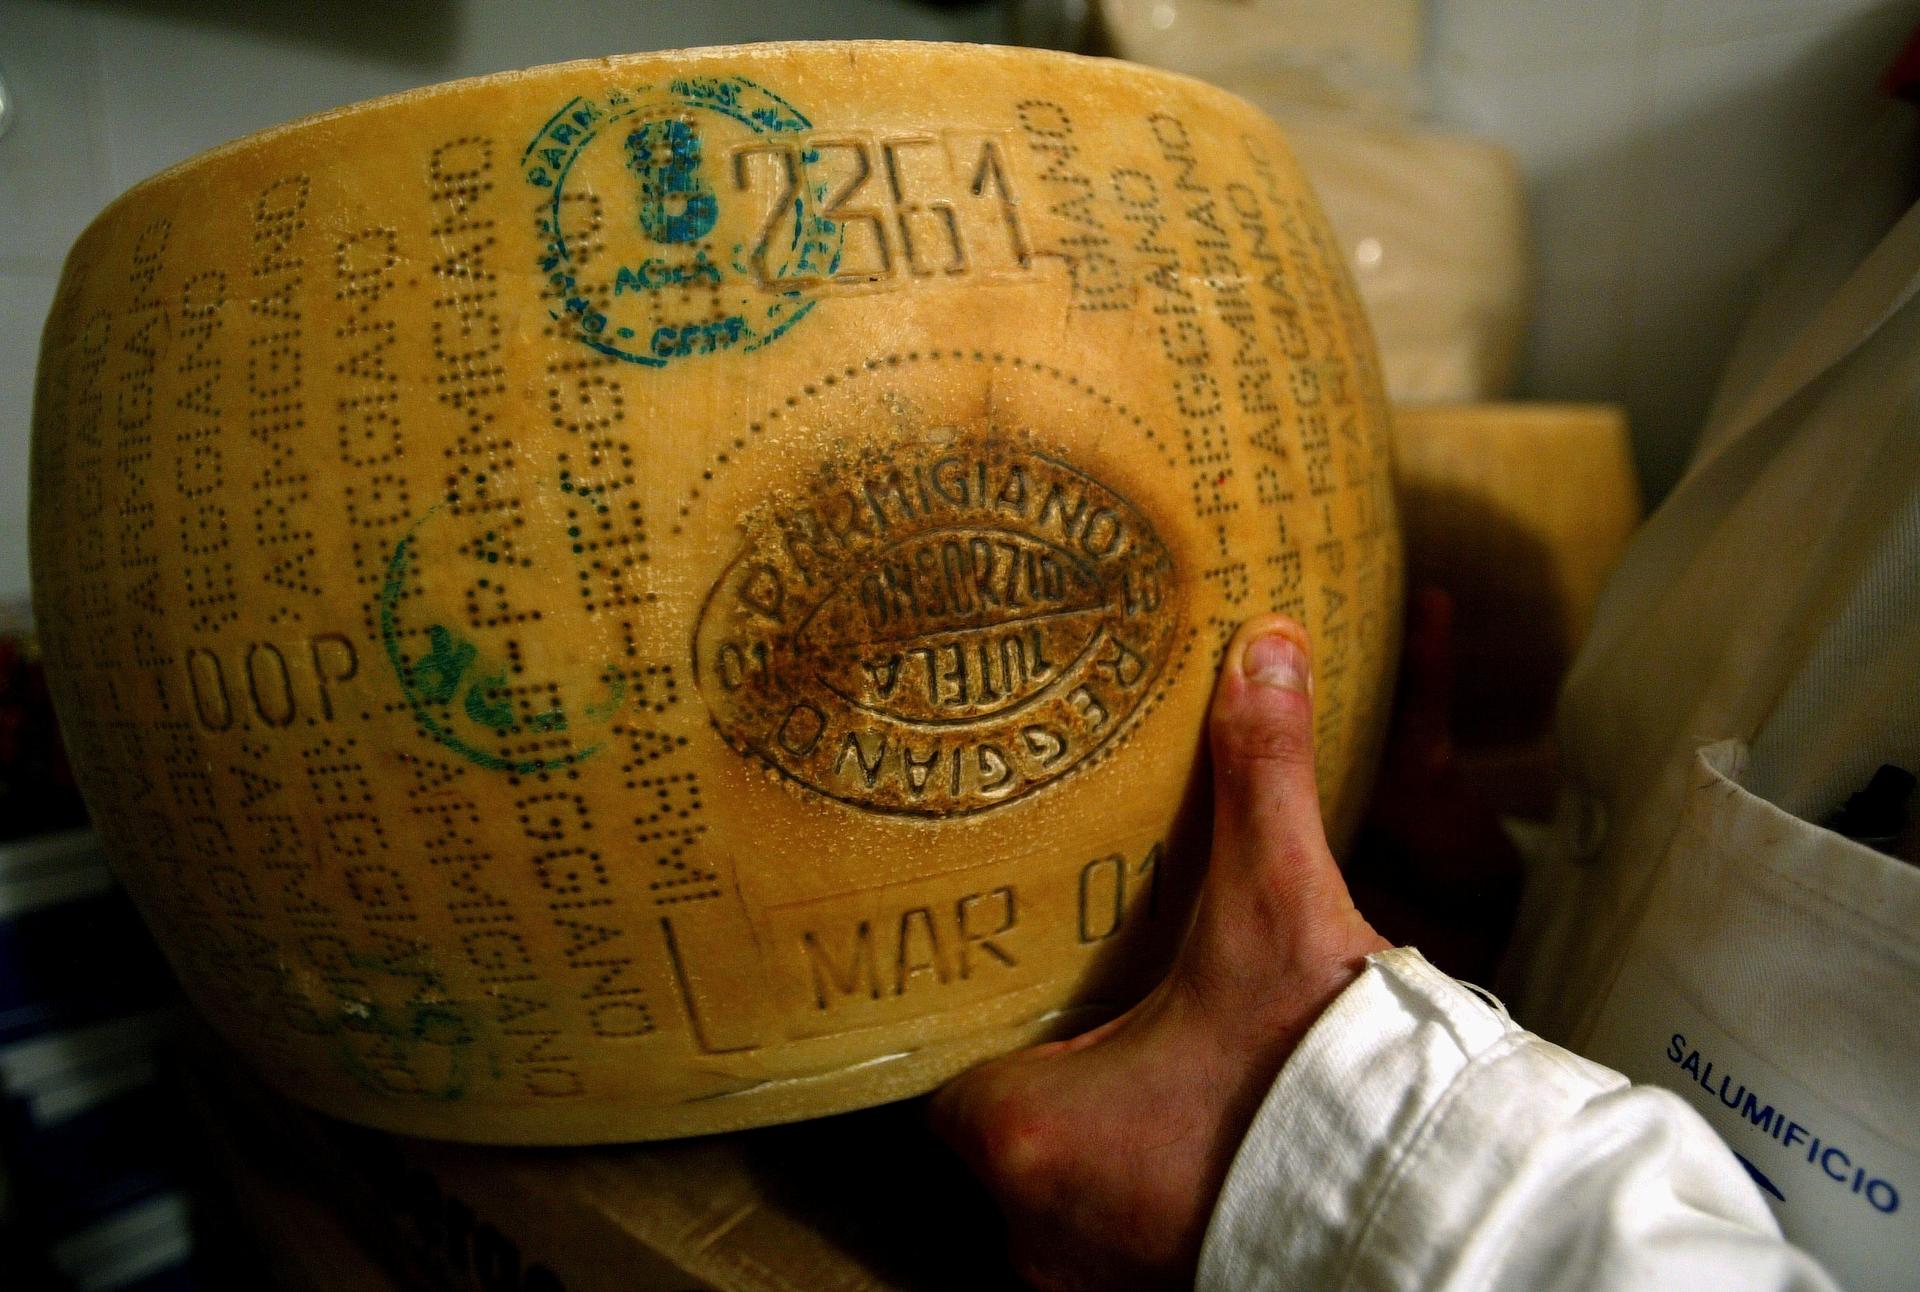 An Italian grocer shows off his Parmesan cheese